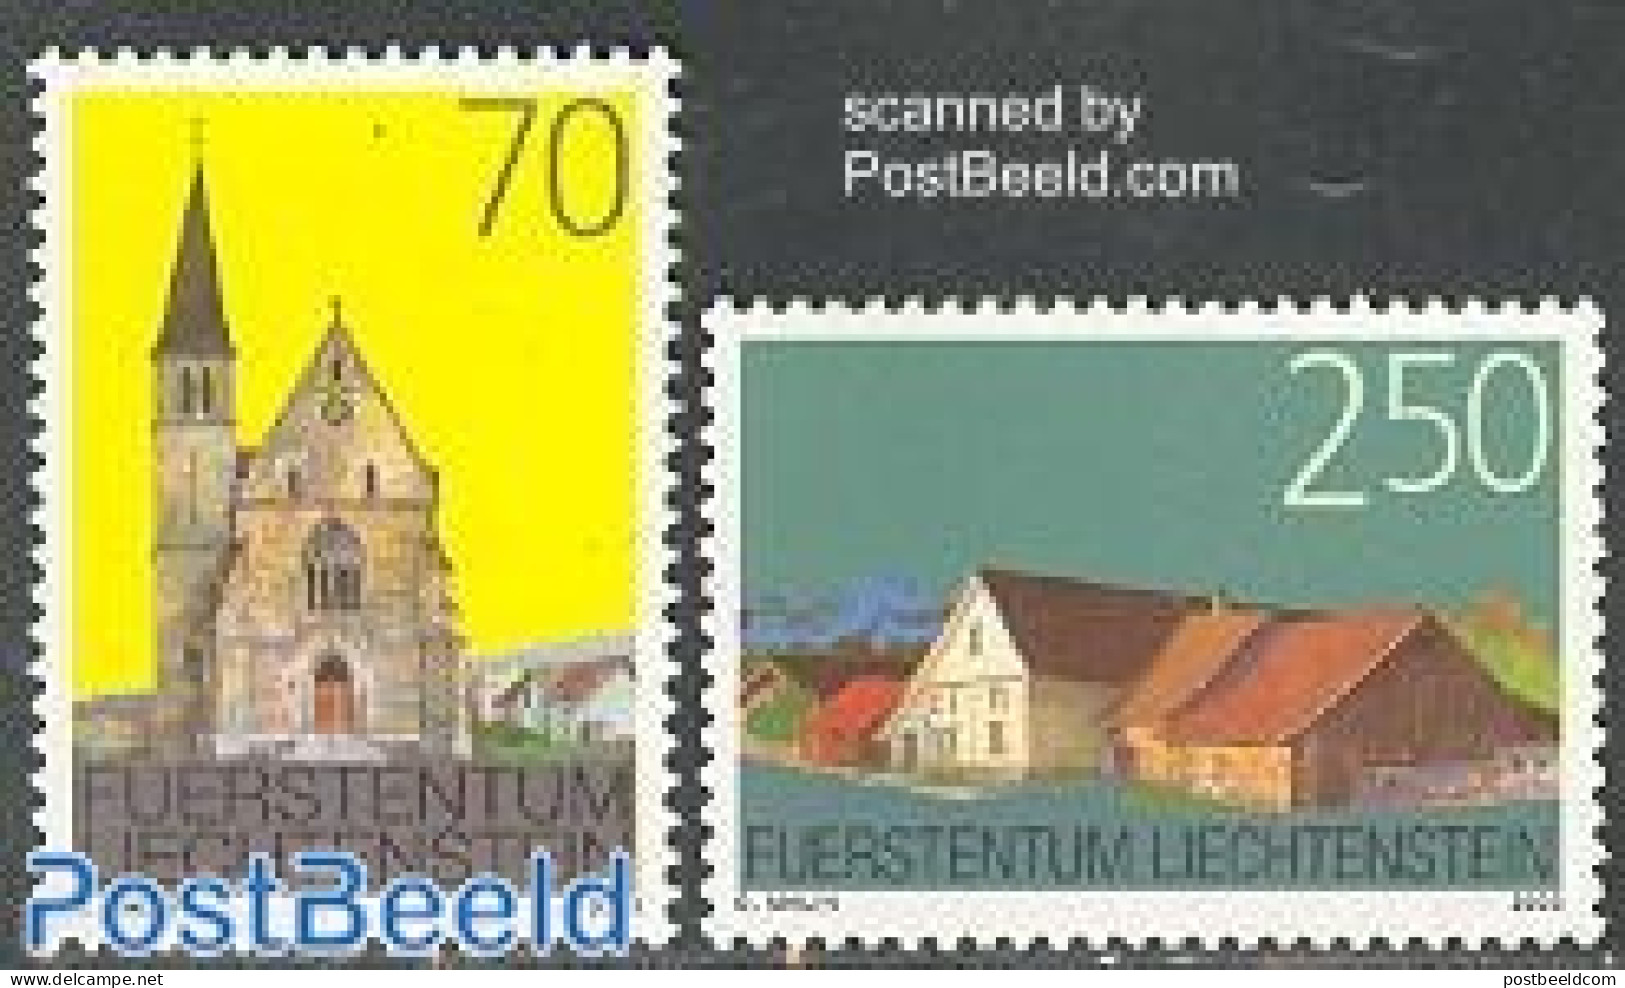 Liechtenstein 2003 Buildings 2v, Mint NH, Religion - Churches, Temples, Mosques, Synagogues - Art - Architecture - Unused Stamps